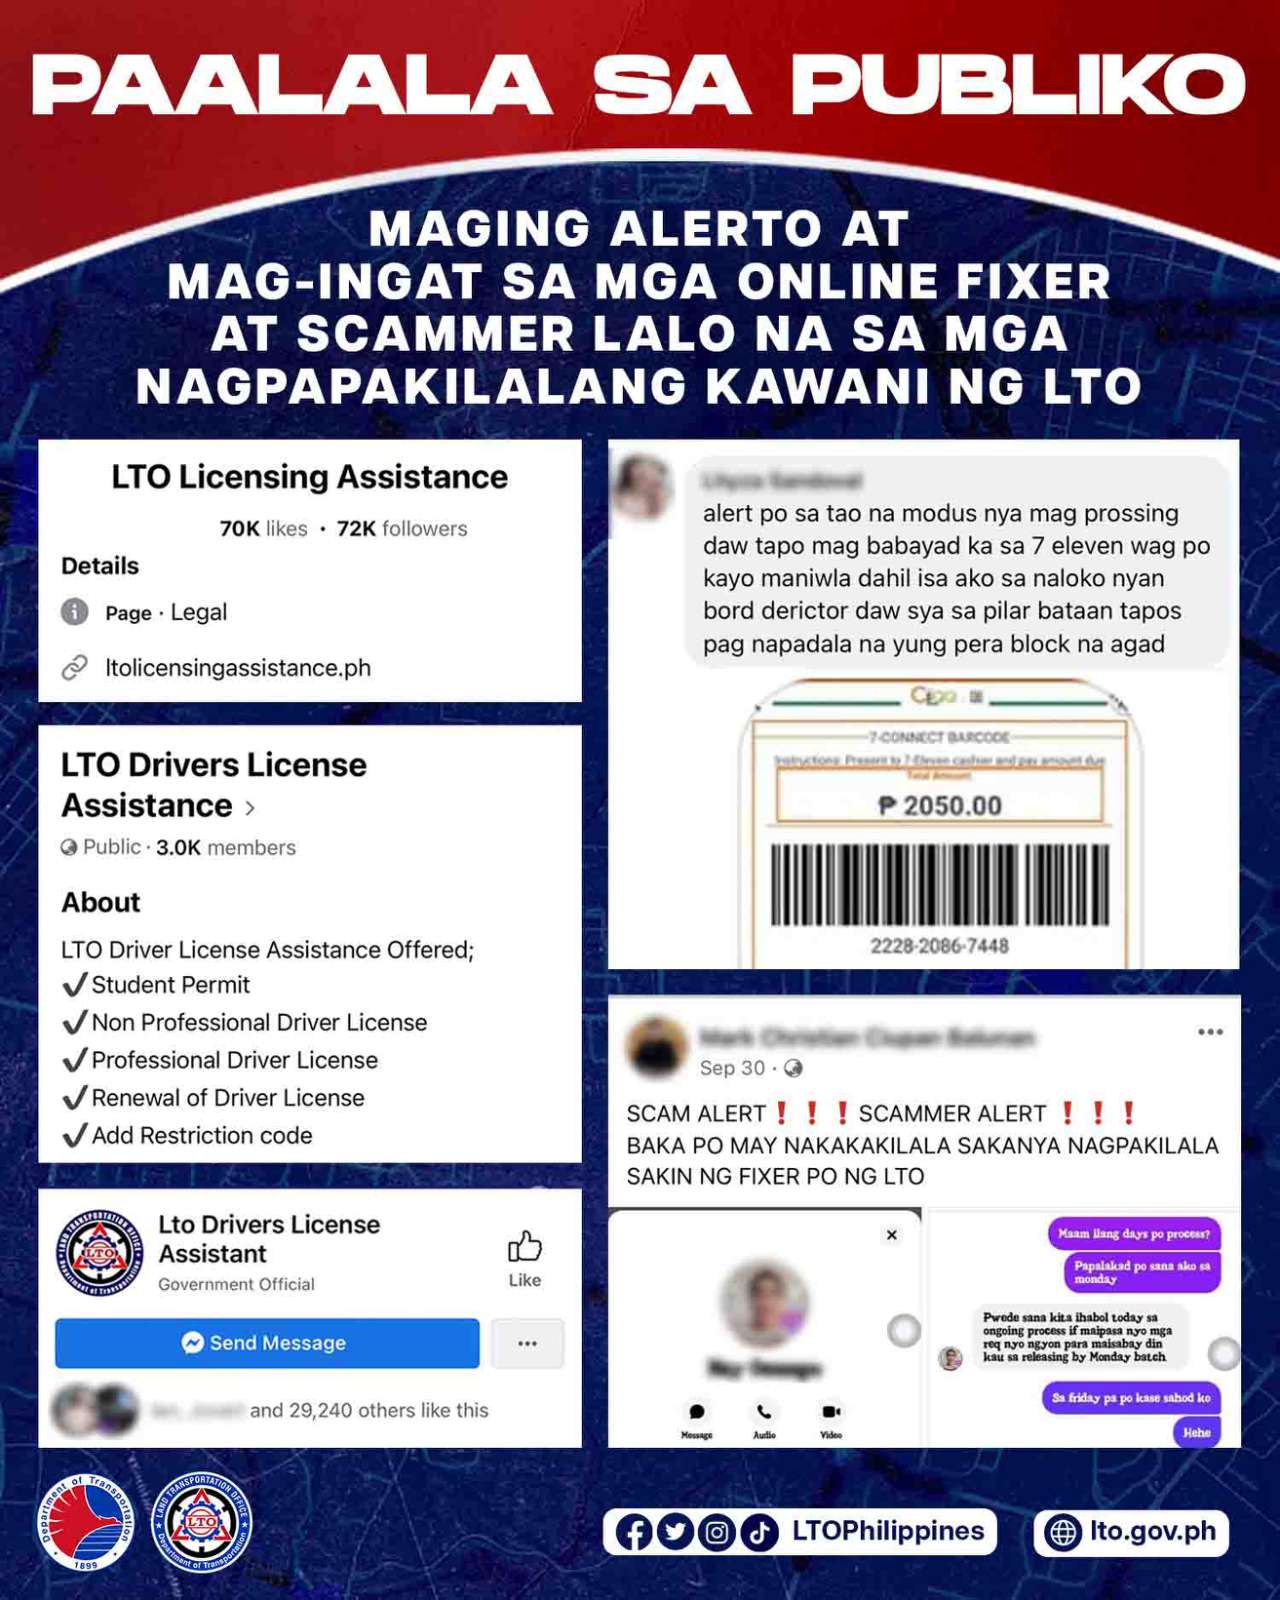 drivers license assistance - lto fixer warning